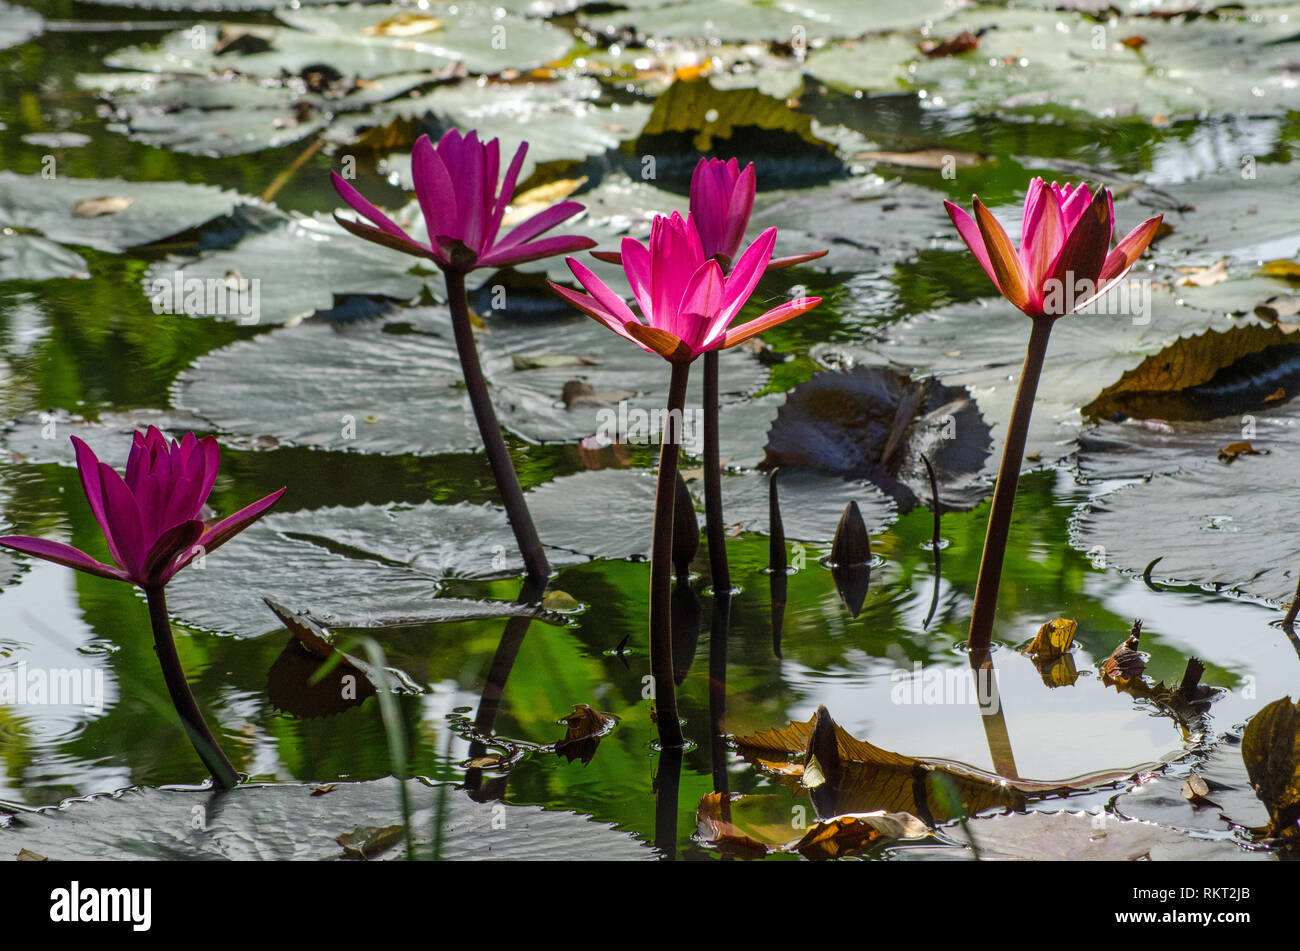 Pink water lilies blooming in the dappled sunshine on a large pond in Tobago, Trinidad and Tobago. Stock Photo